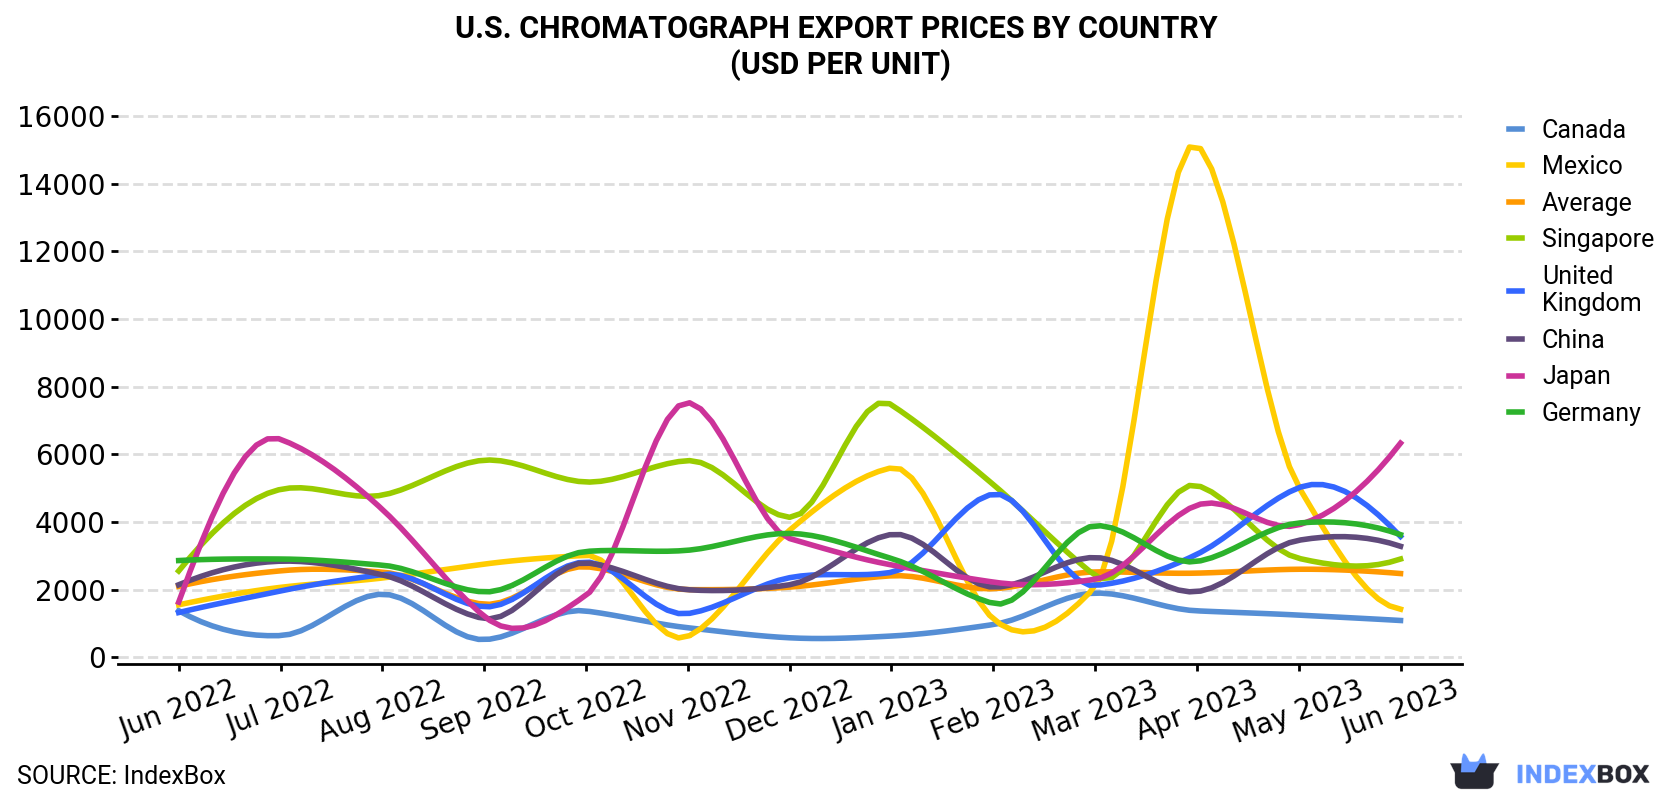 U.S. Chromatograph Export Prices By Country (USD Per Unit)